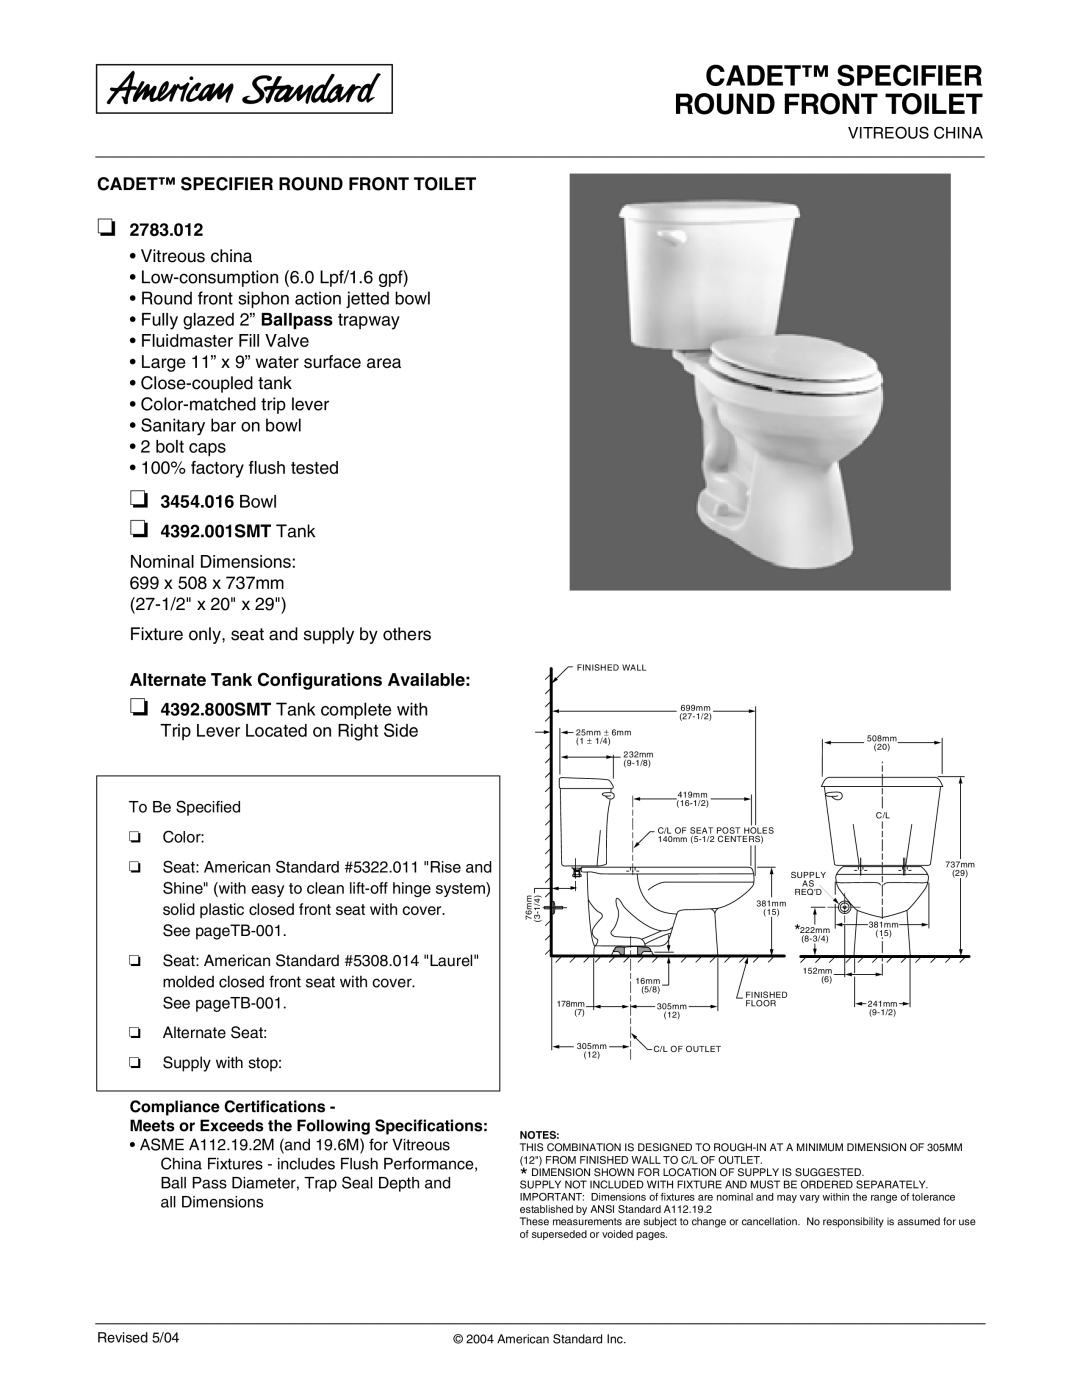 American Standard 2783.012 dimensions Cadet Specifier Round Front Toilet, Bowl 4392.001SMT Tank 